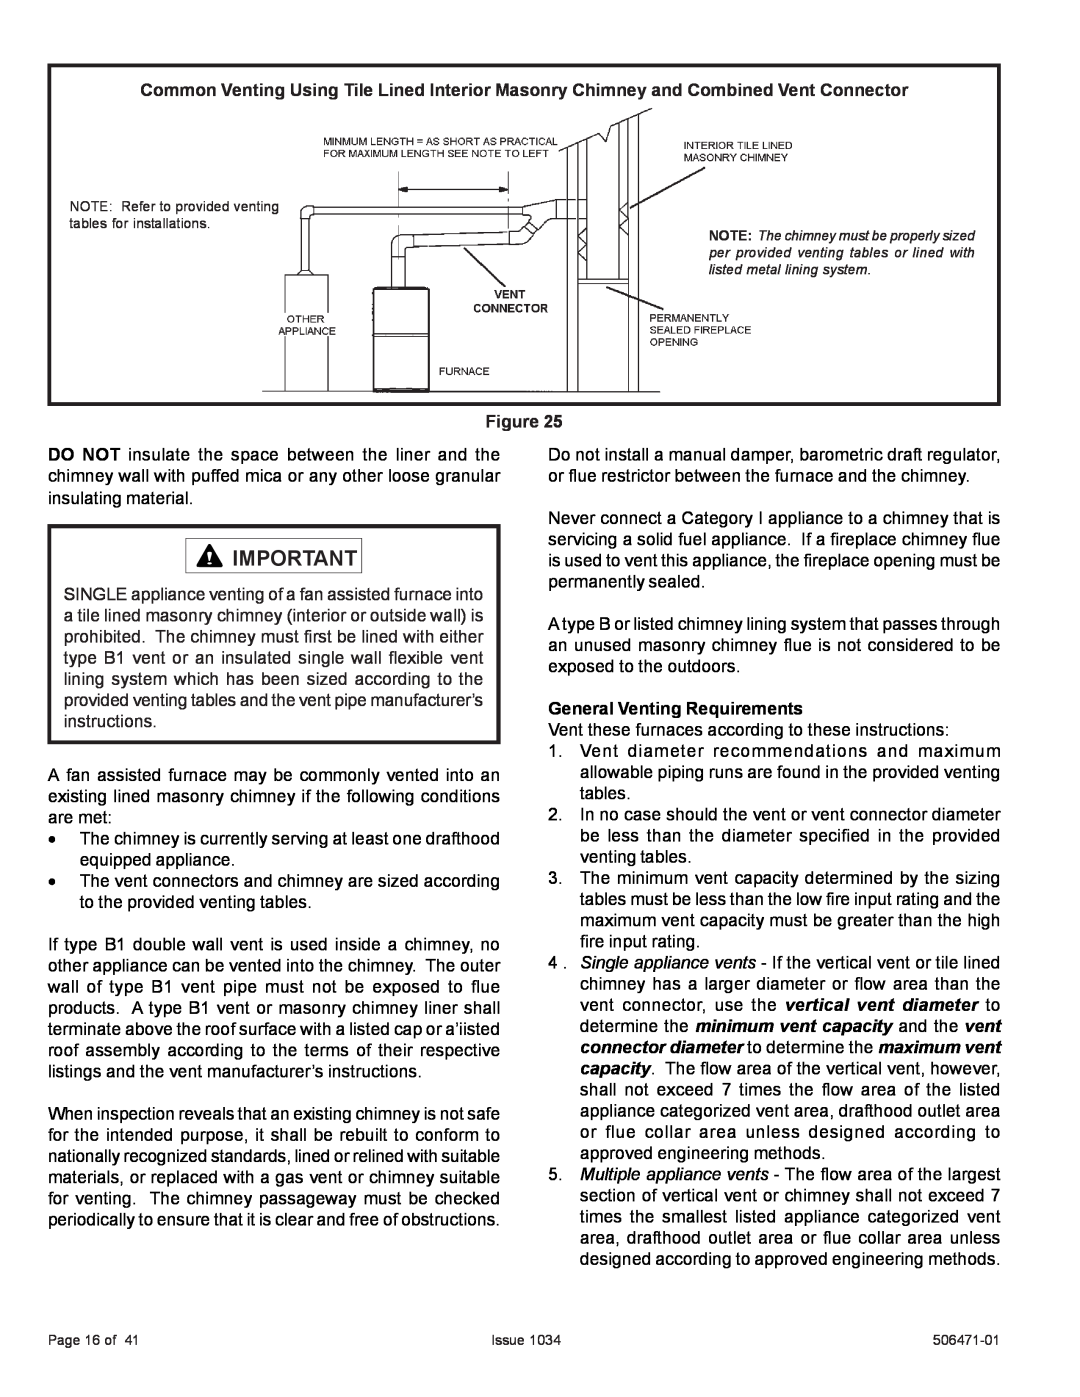 Allied Air Enterprises A80UH2V, 80G1UH2V General Venting Requirements, Page 16 of, Issue, 506471-01 